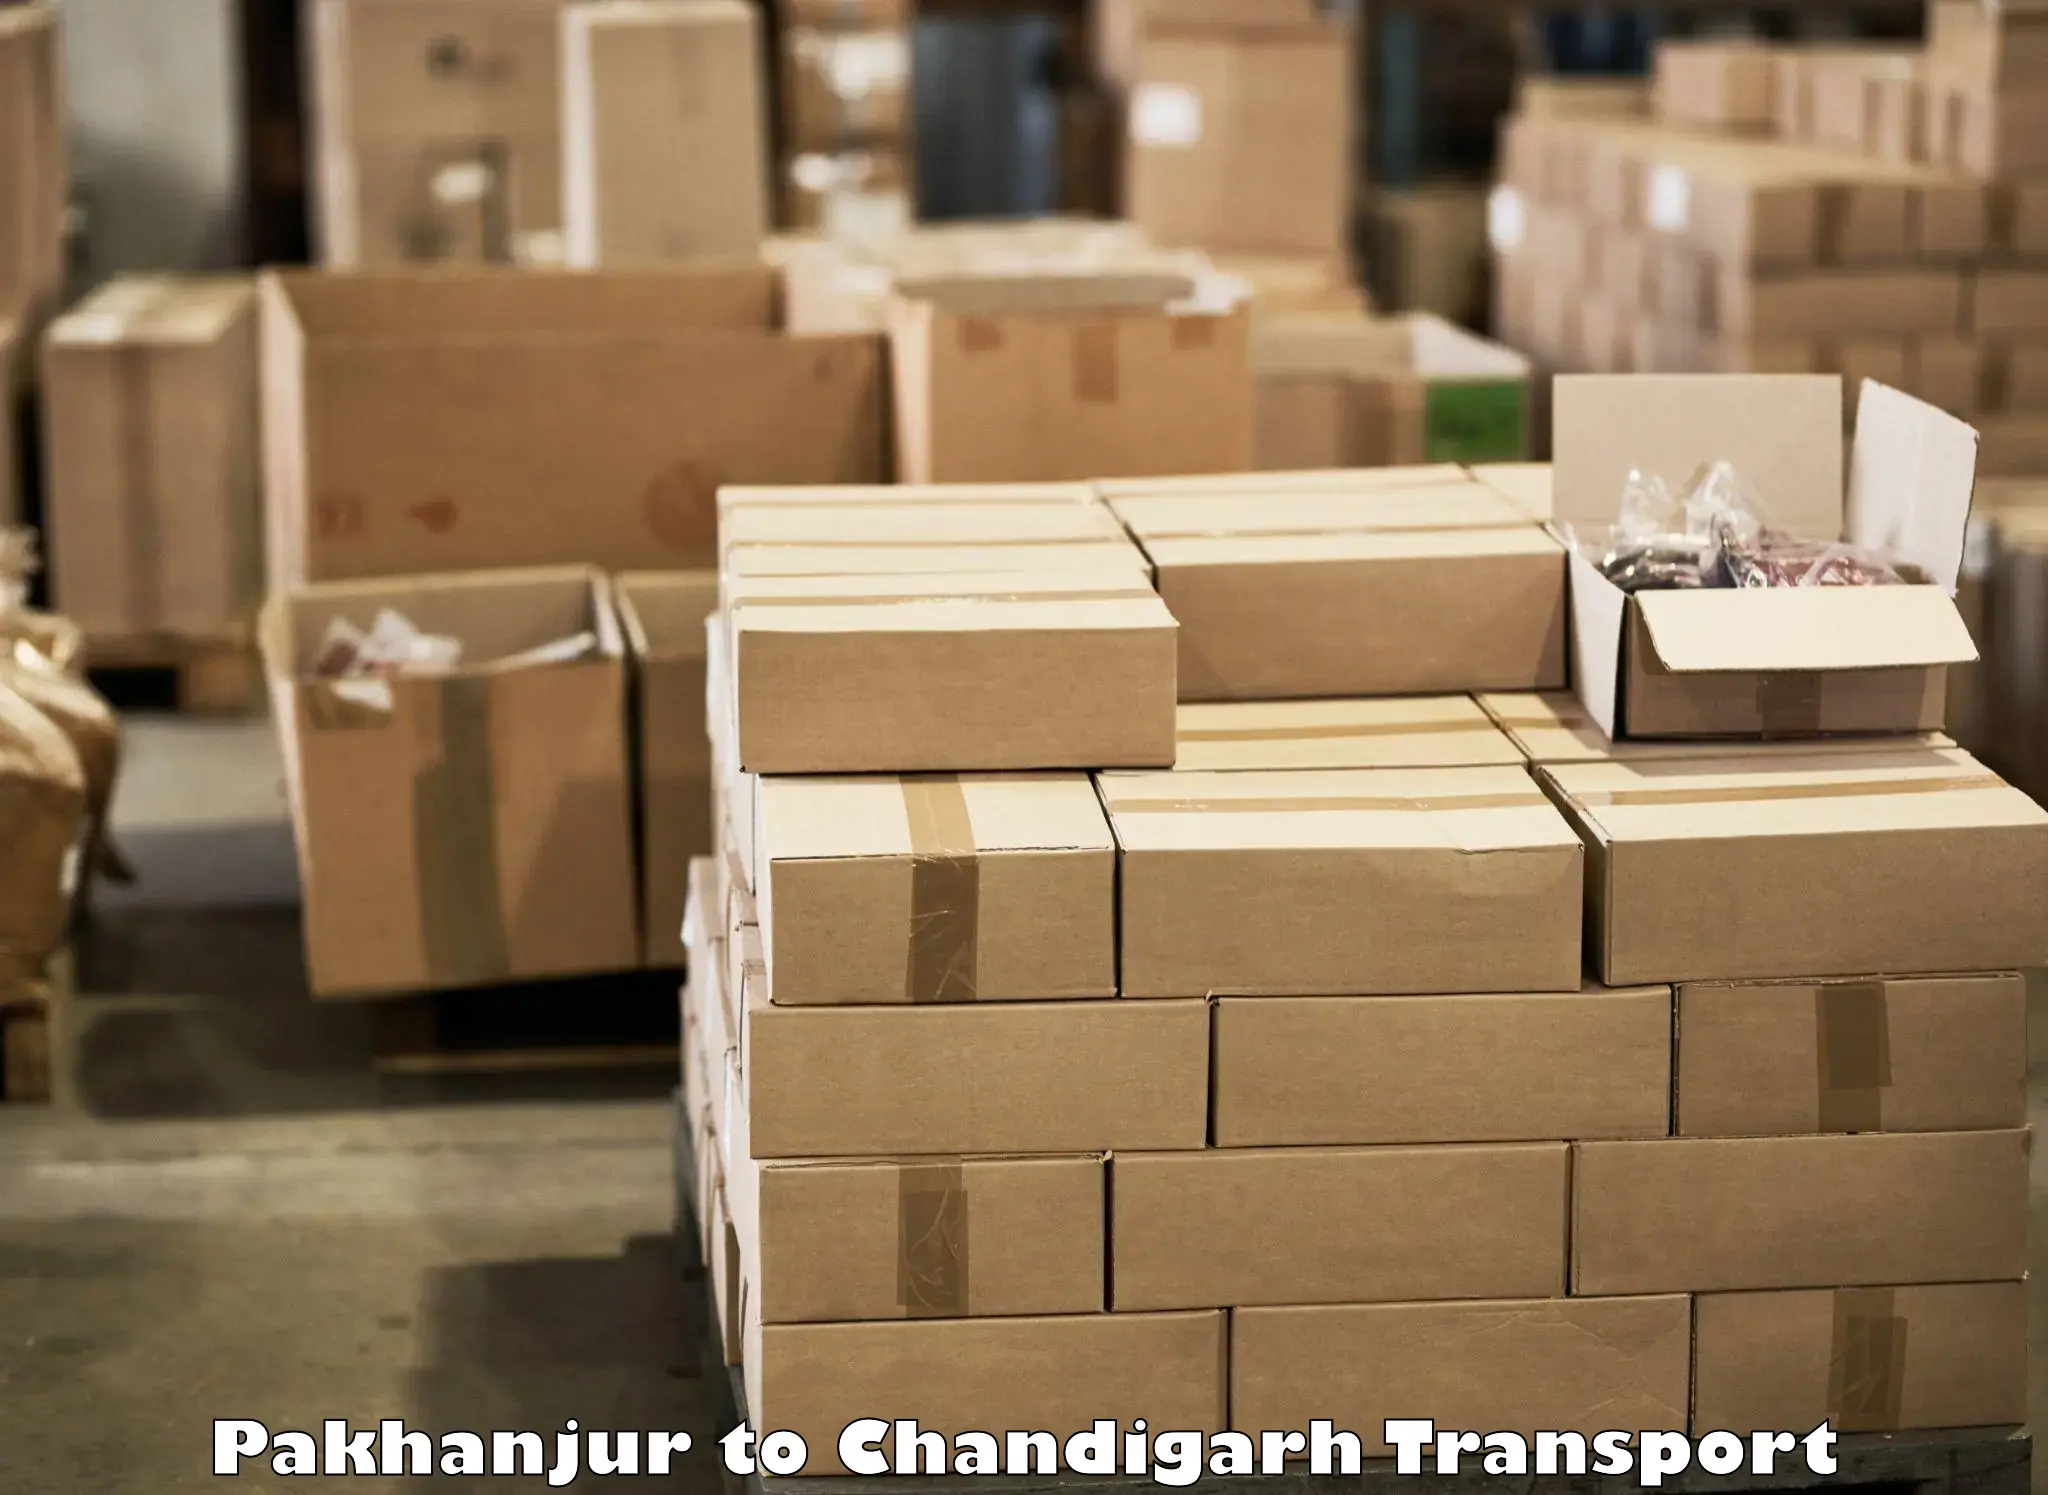 Container transportation services Pakhanjur to Chandigarh